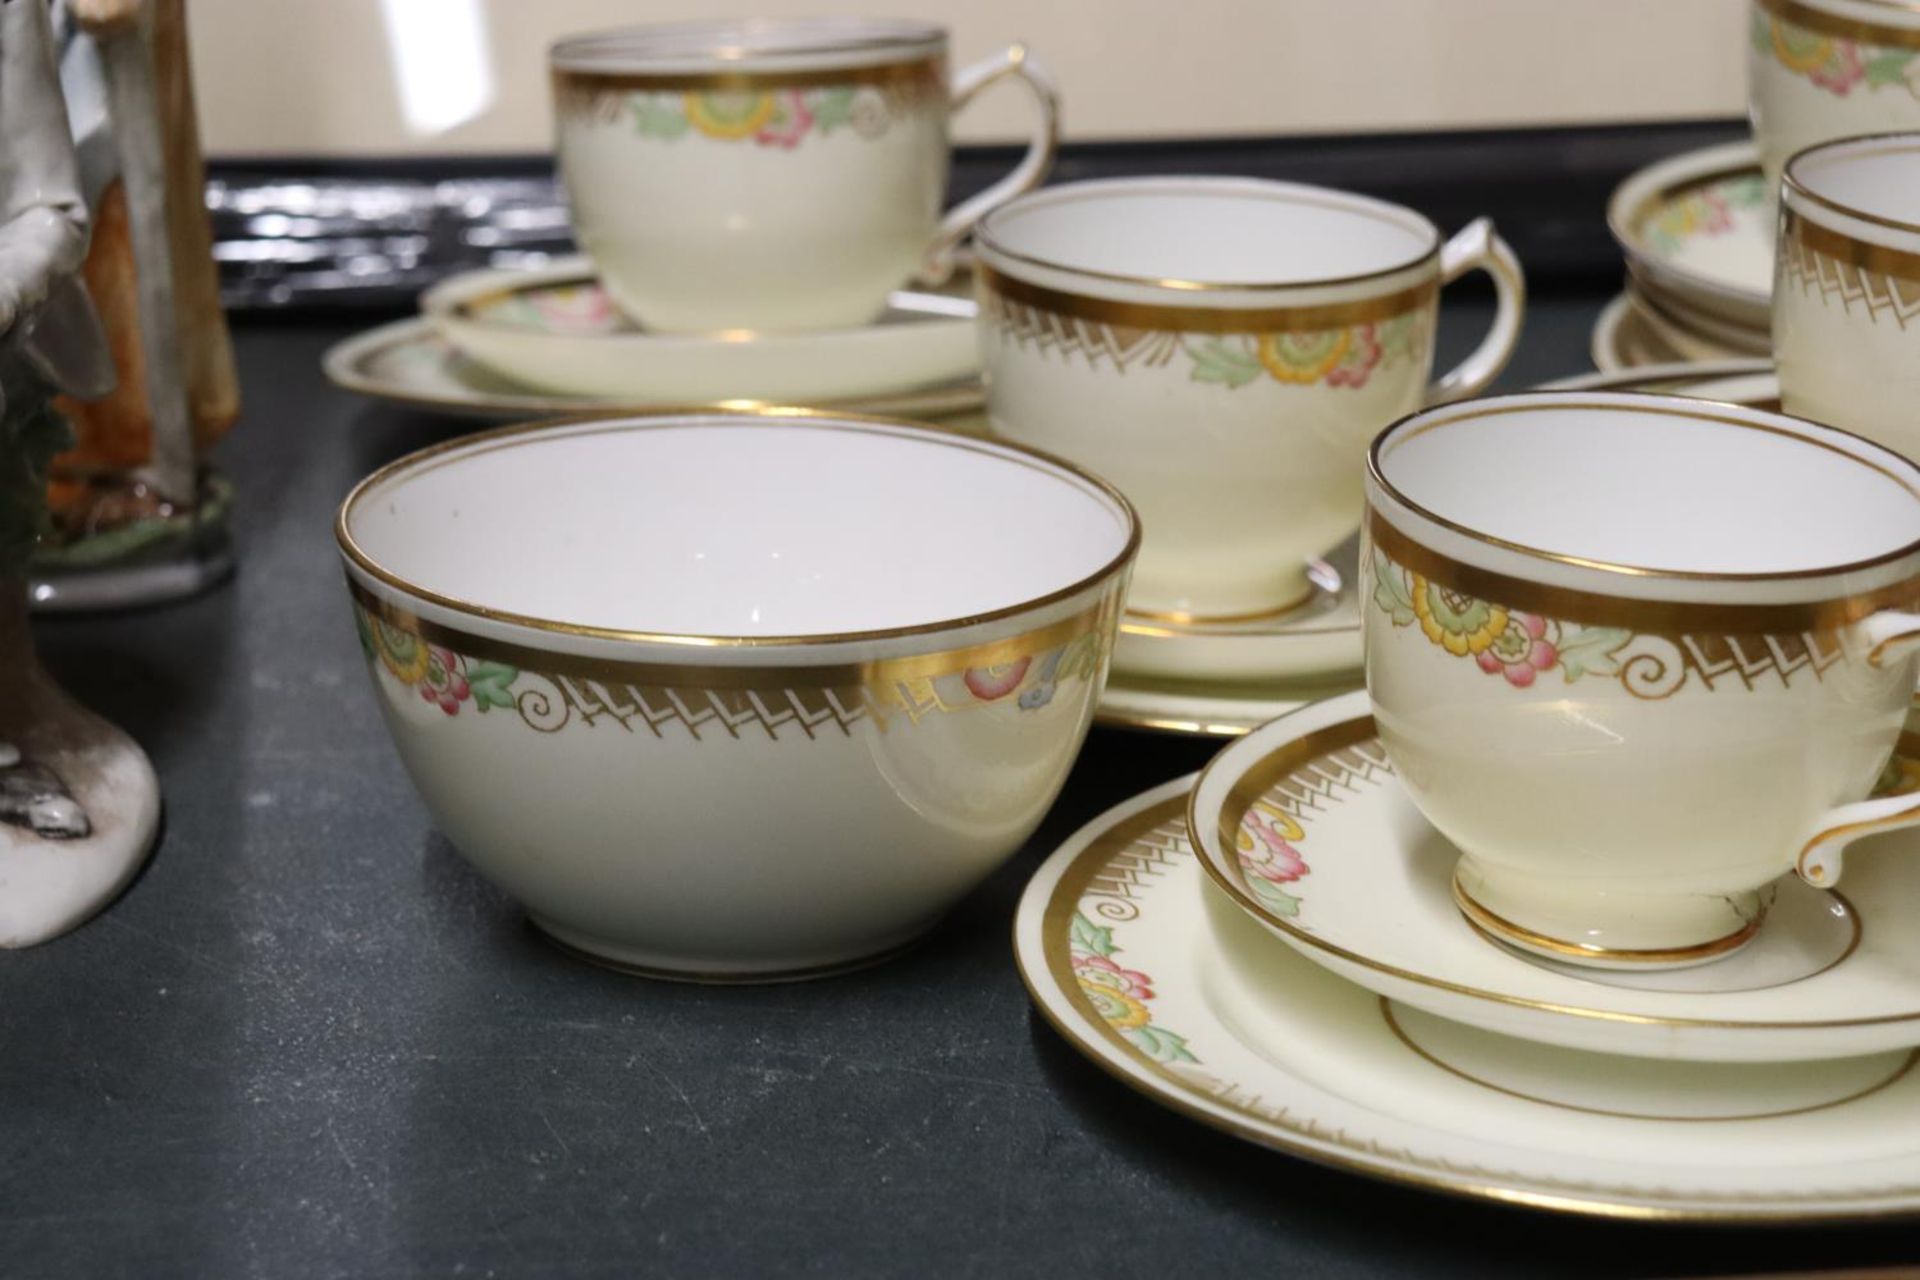 A QUANTITY OF VINTAGE HAMMERSLEY, CHINA CUPS, SAUCERS AND SIDE PLATES - Image 5 of 5